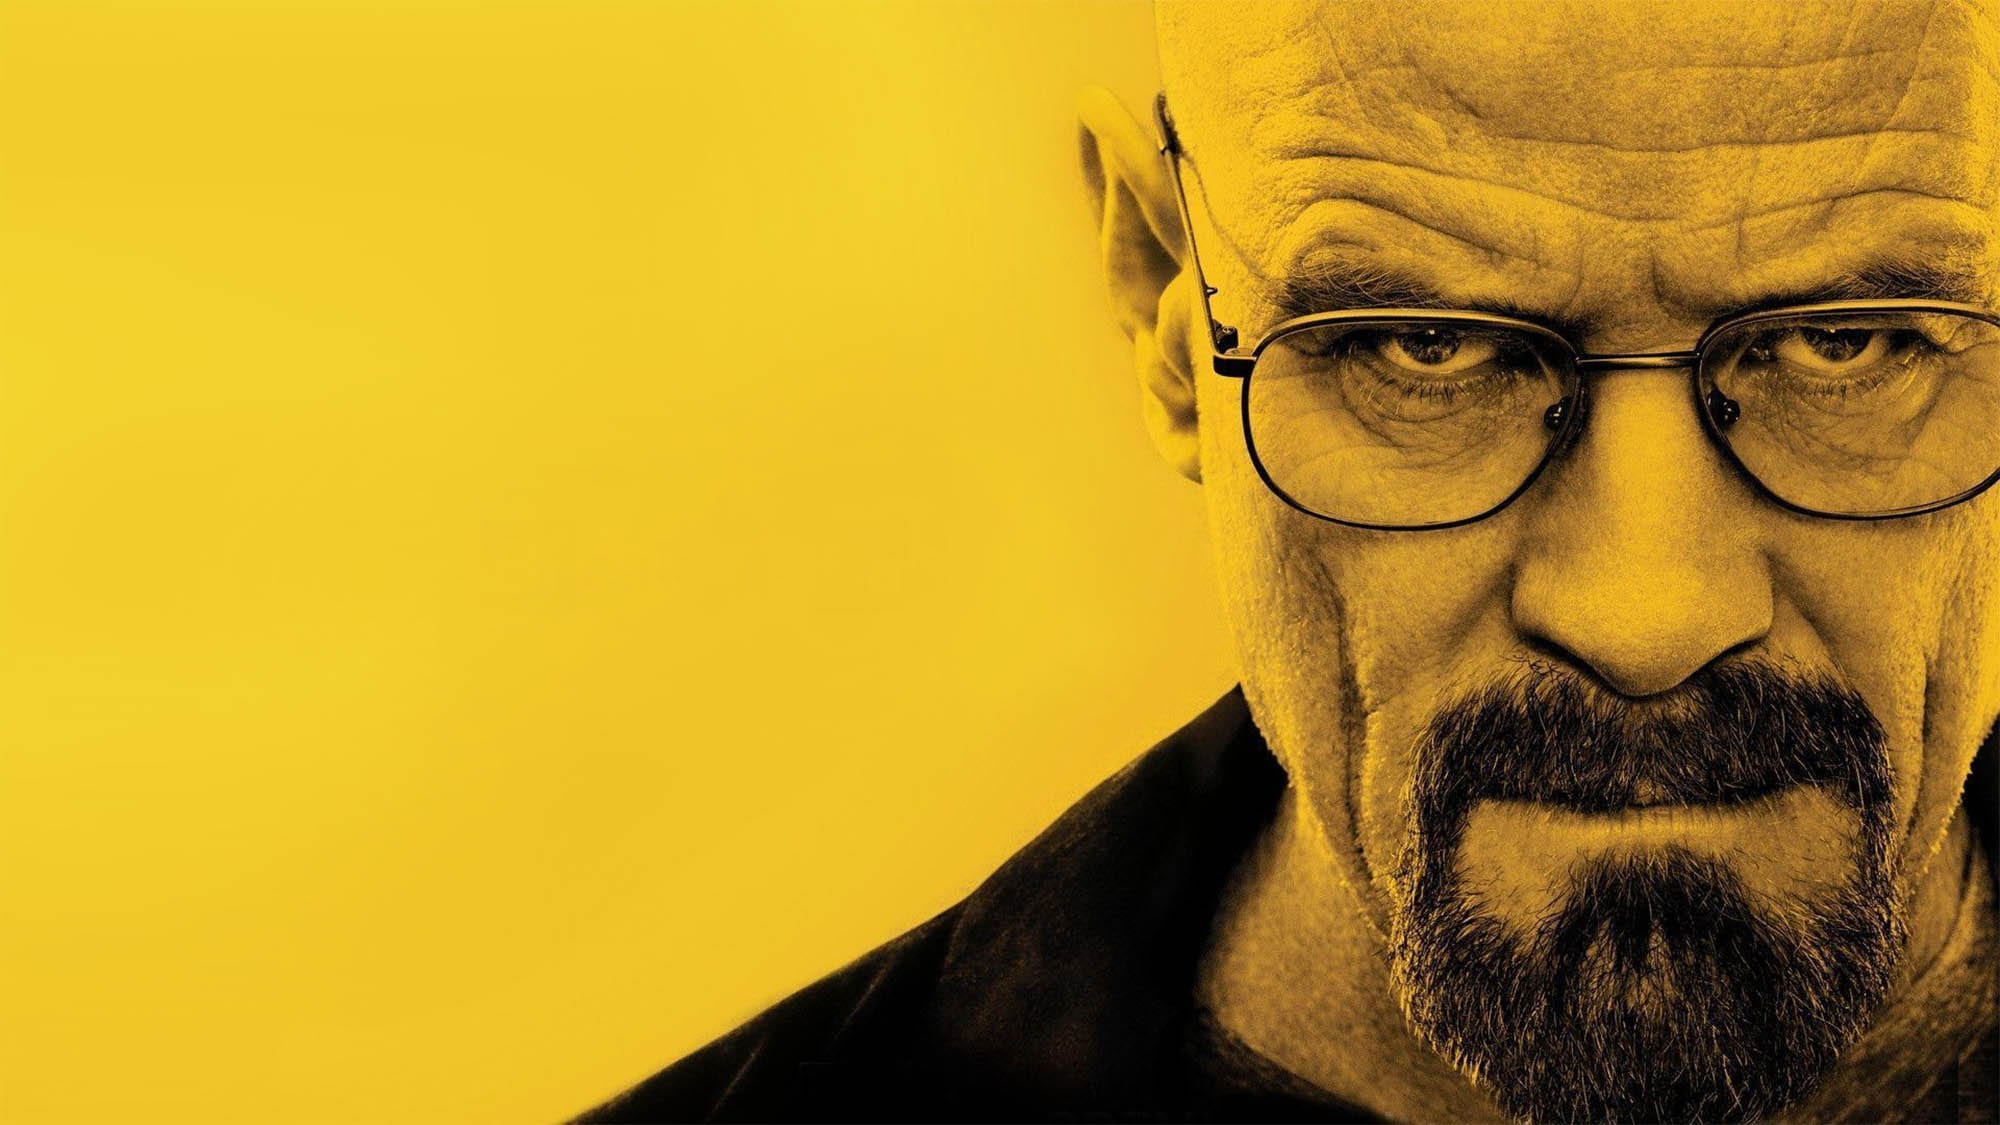 During 'Breaking Bad’'s original reign, the internet was full of crazy fan theories. Here are five of our favorite crazy Breaking Bad fan theories.